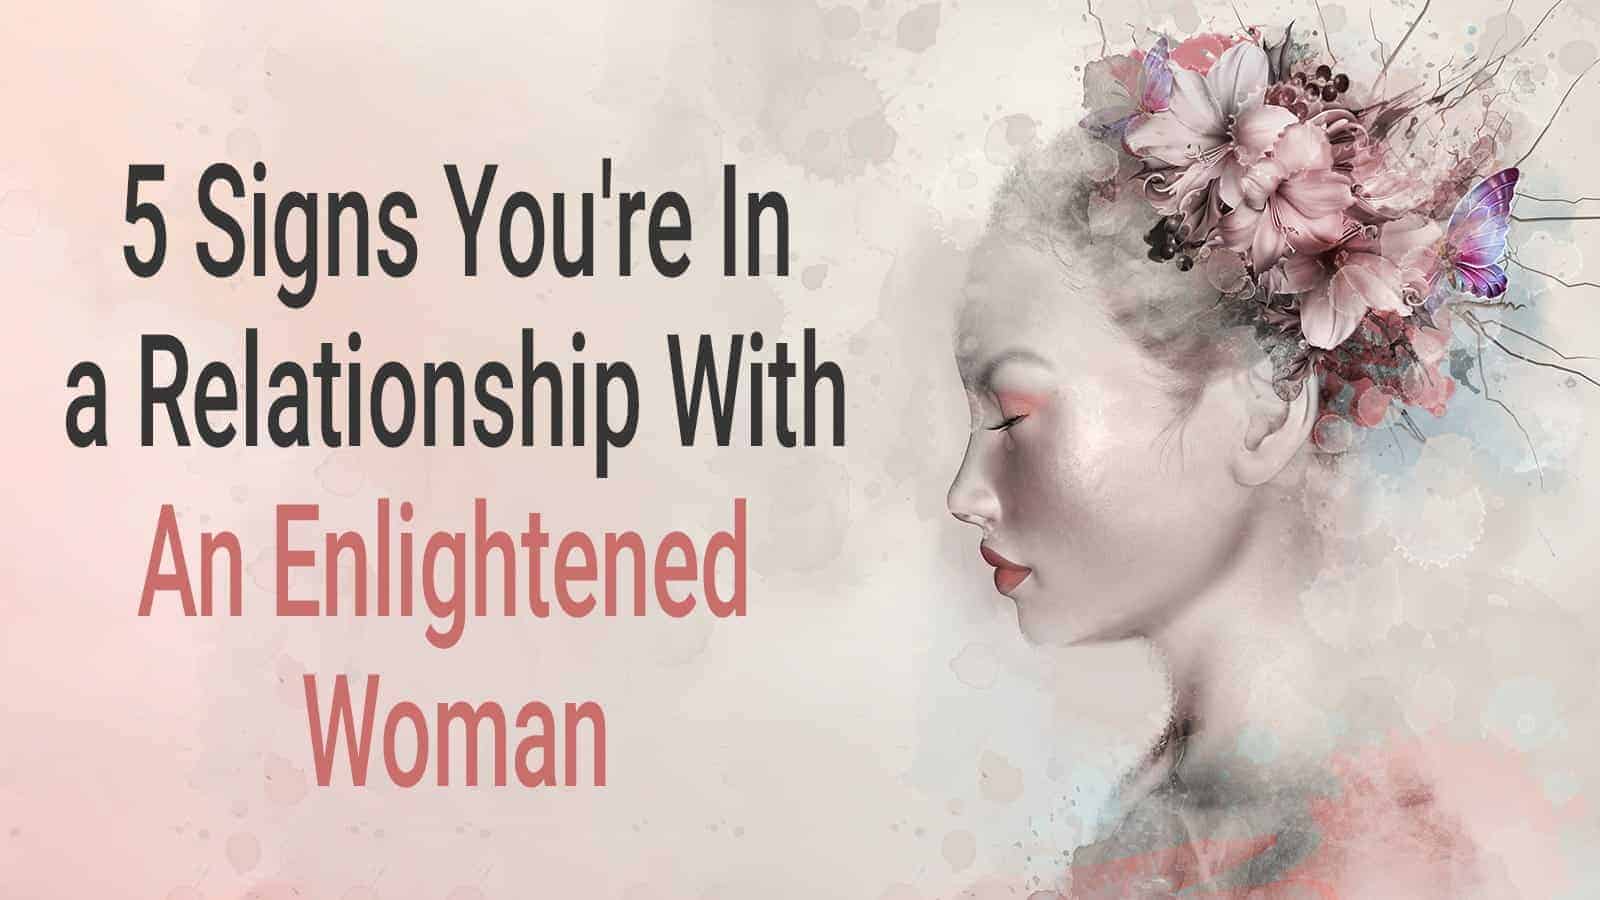 What are the Signs You’re In a Relationship With An Enlightened Woman